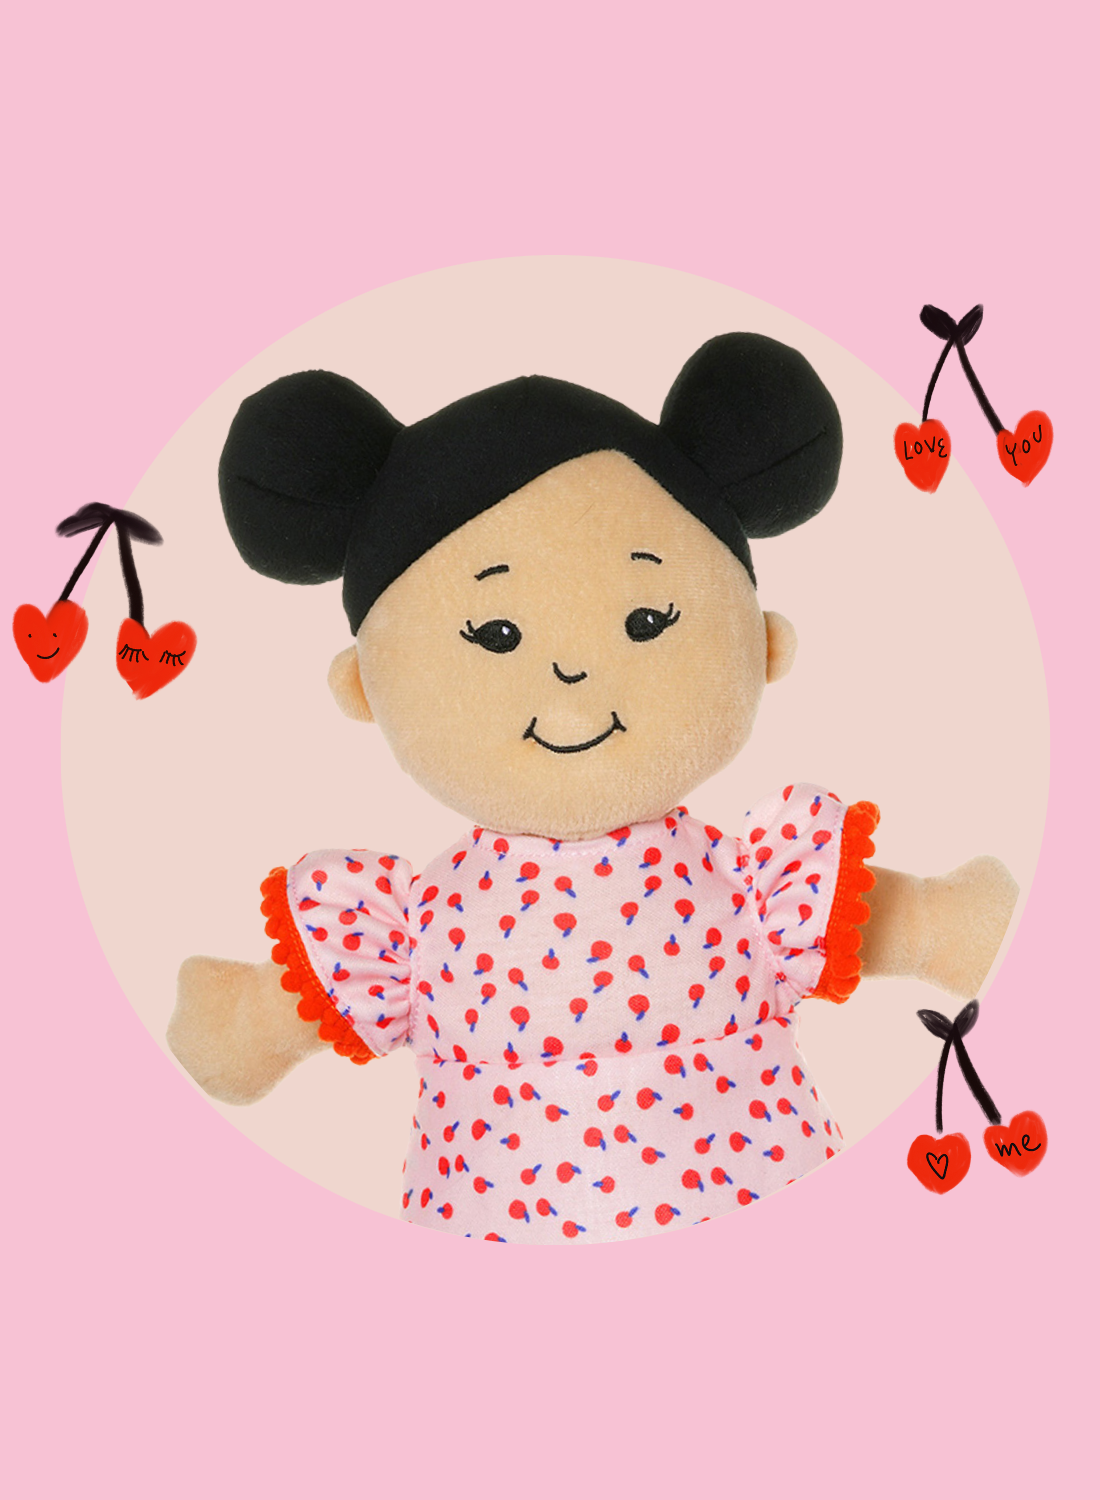 soft baby doll with black hair and cherry print dress